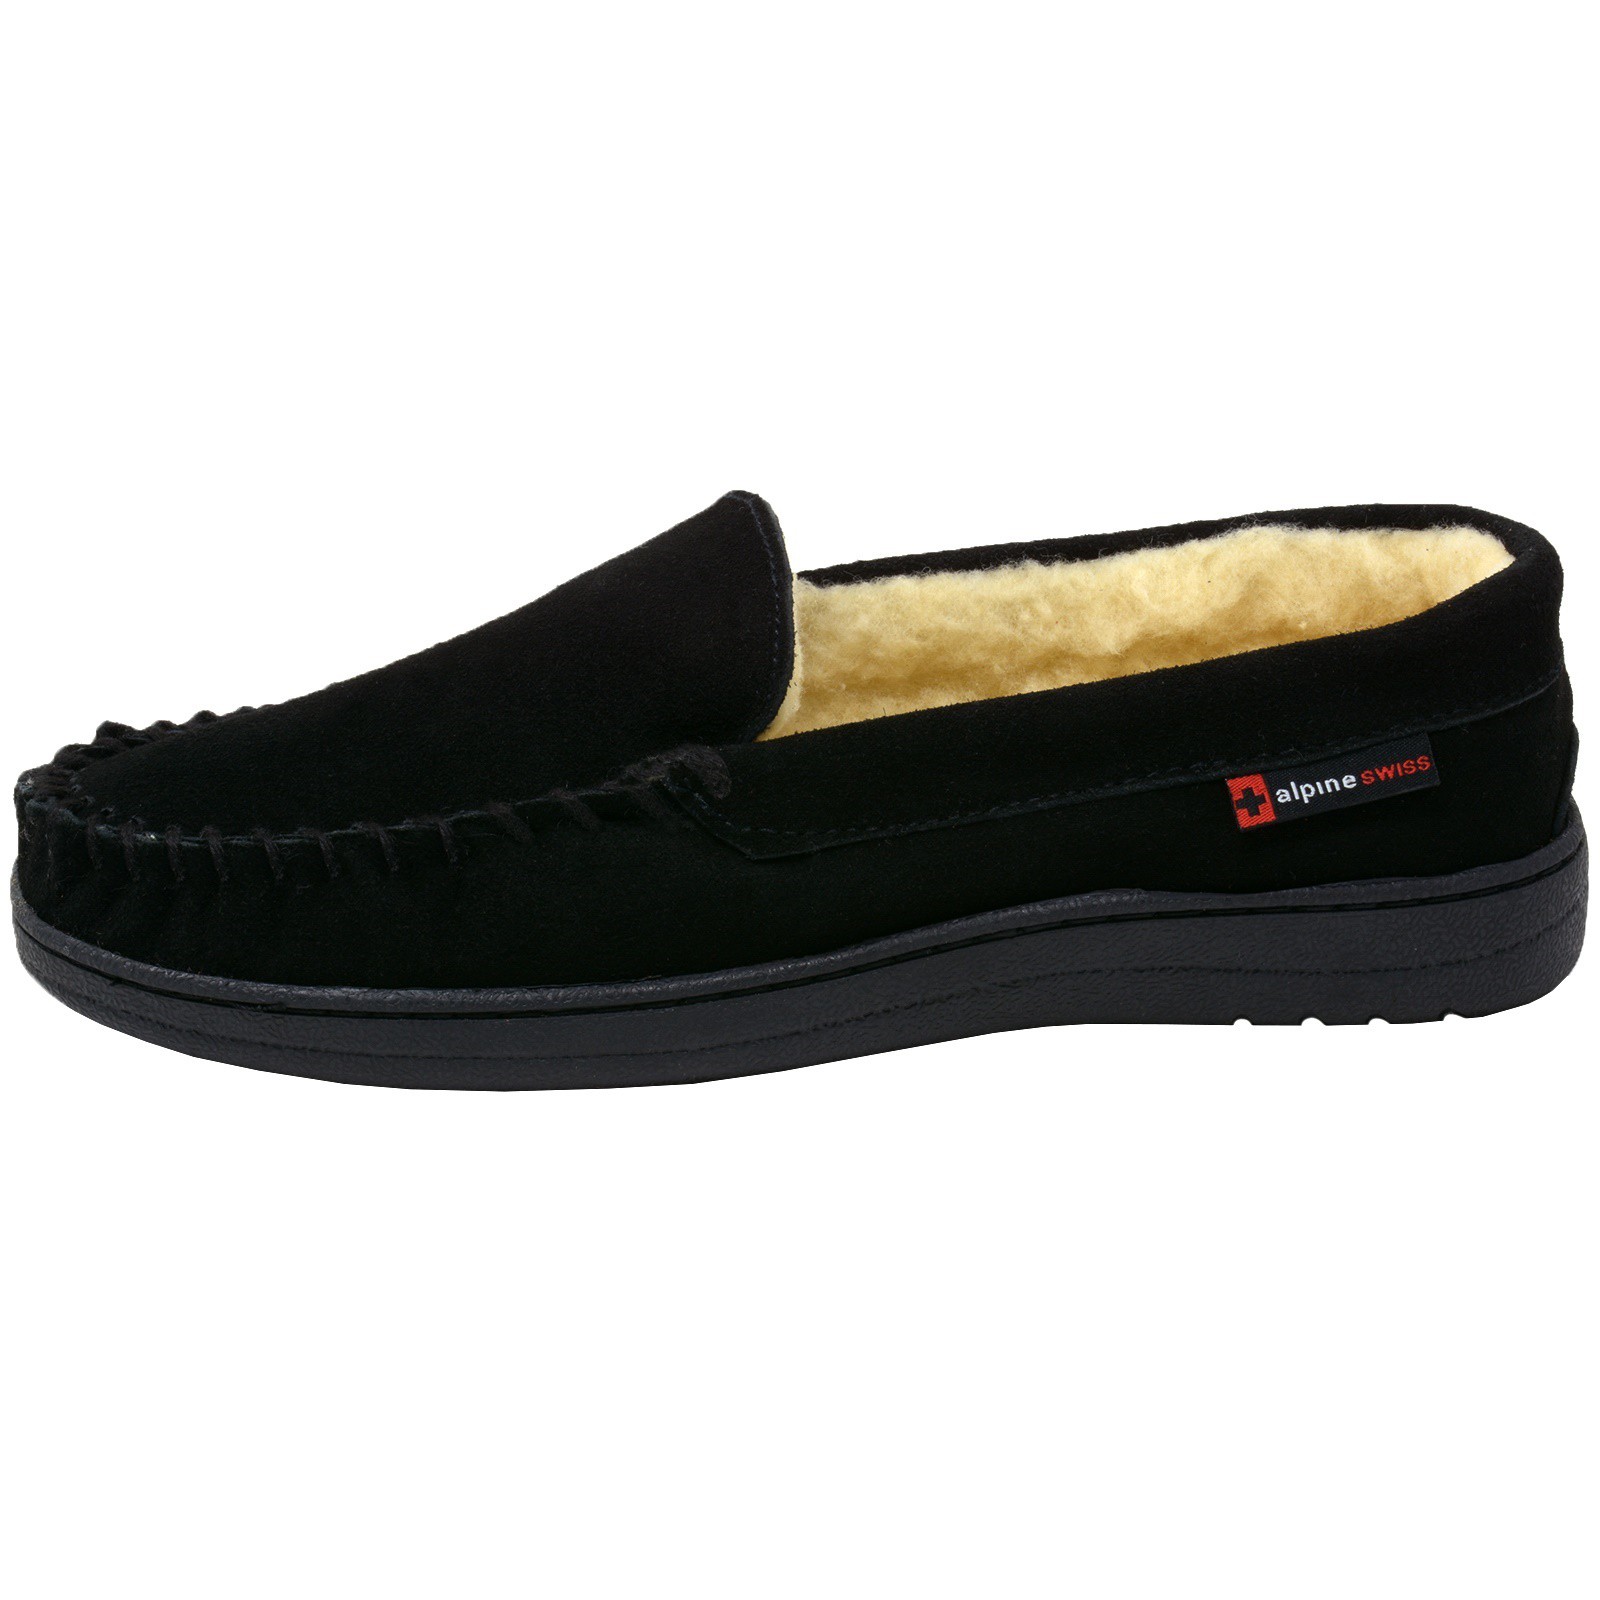 Alpine Swiss Yukon Mens Suede Shearling Moccasin Slippers Moc Toe Slip On Shoes - image 5 of 7